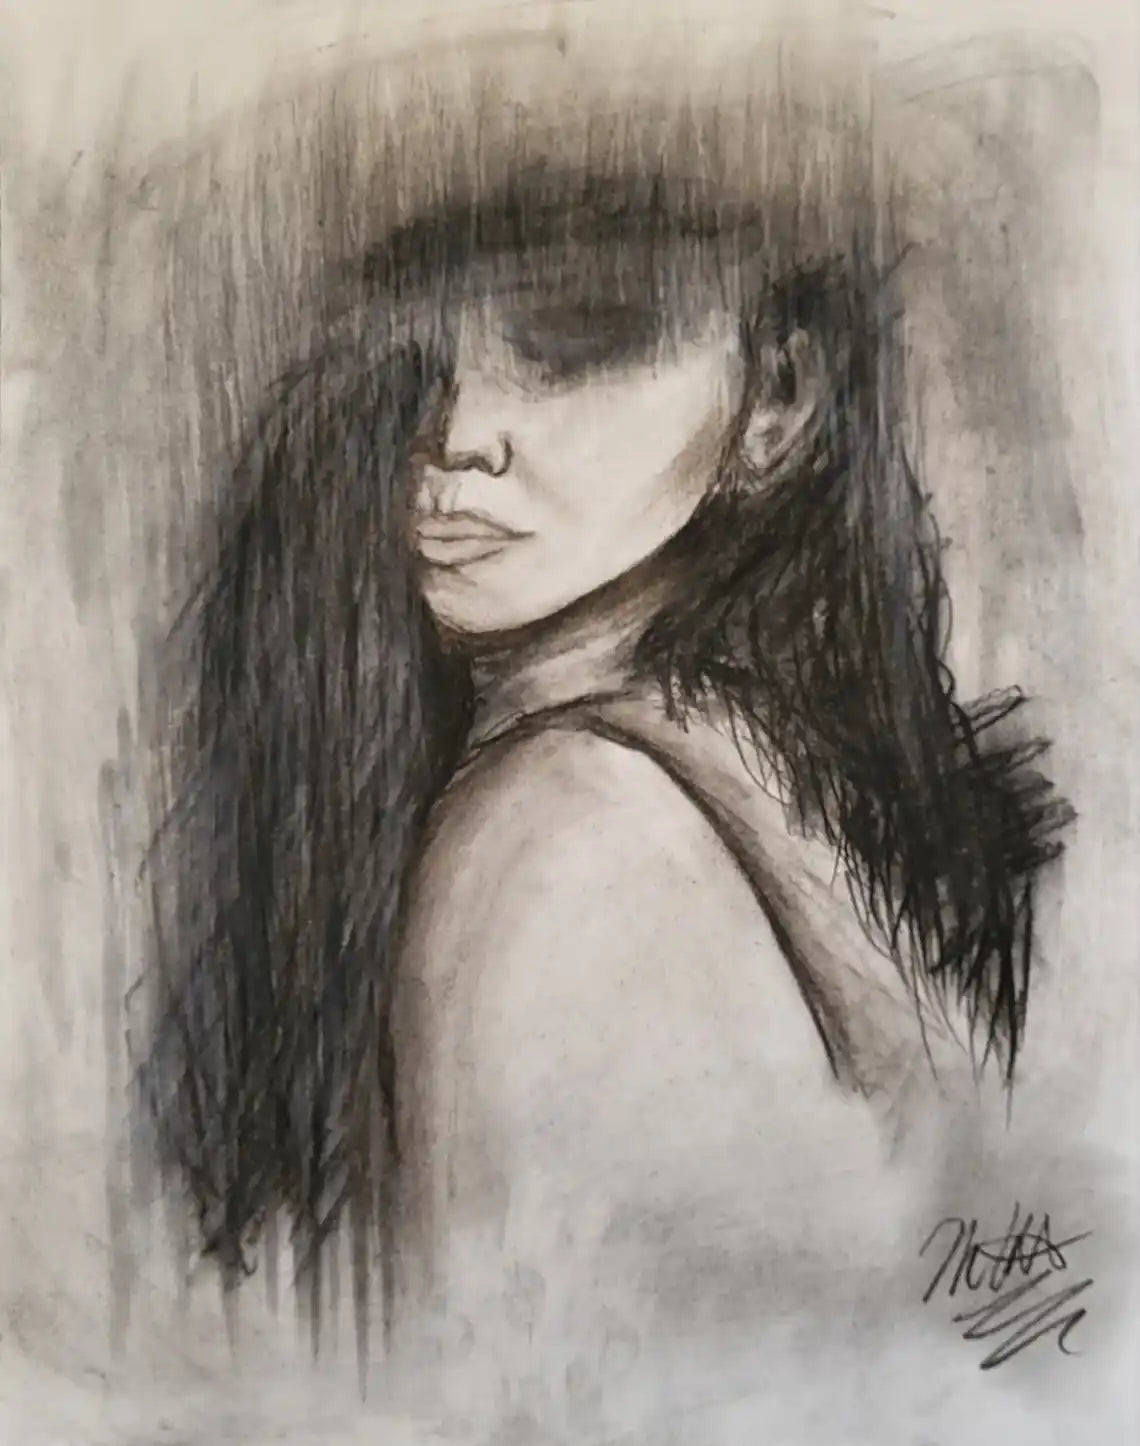 Charcoal Portrait Drawing Tutorial